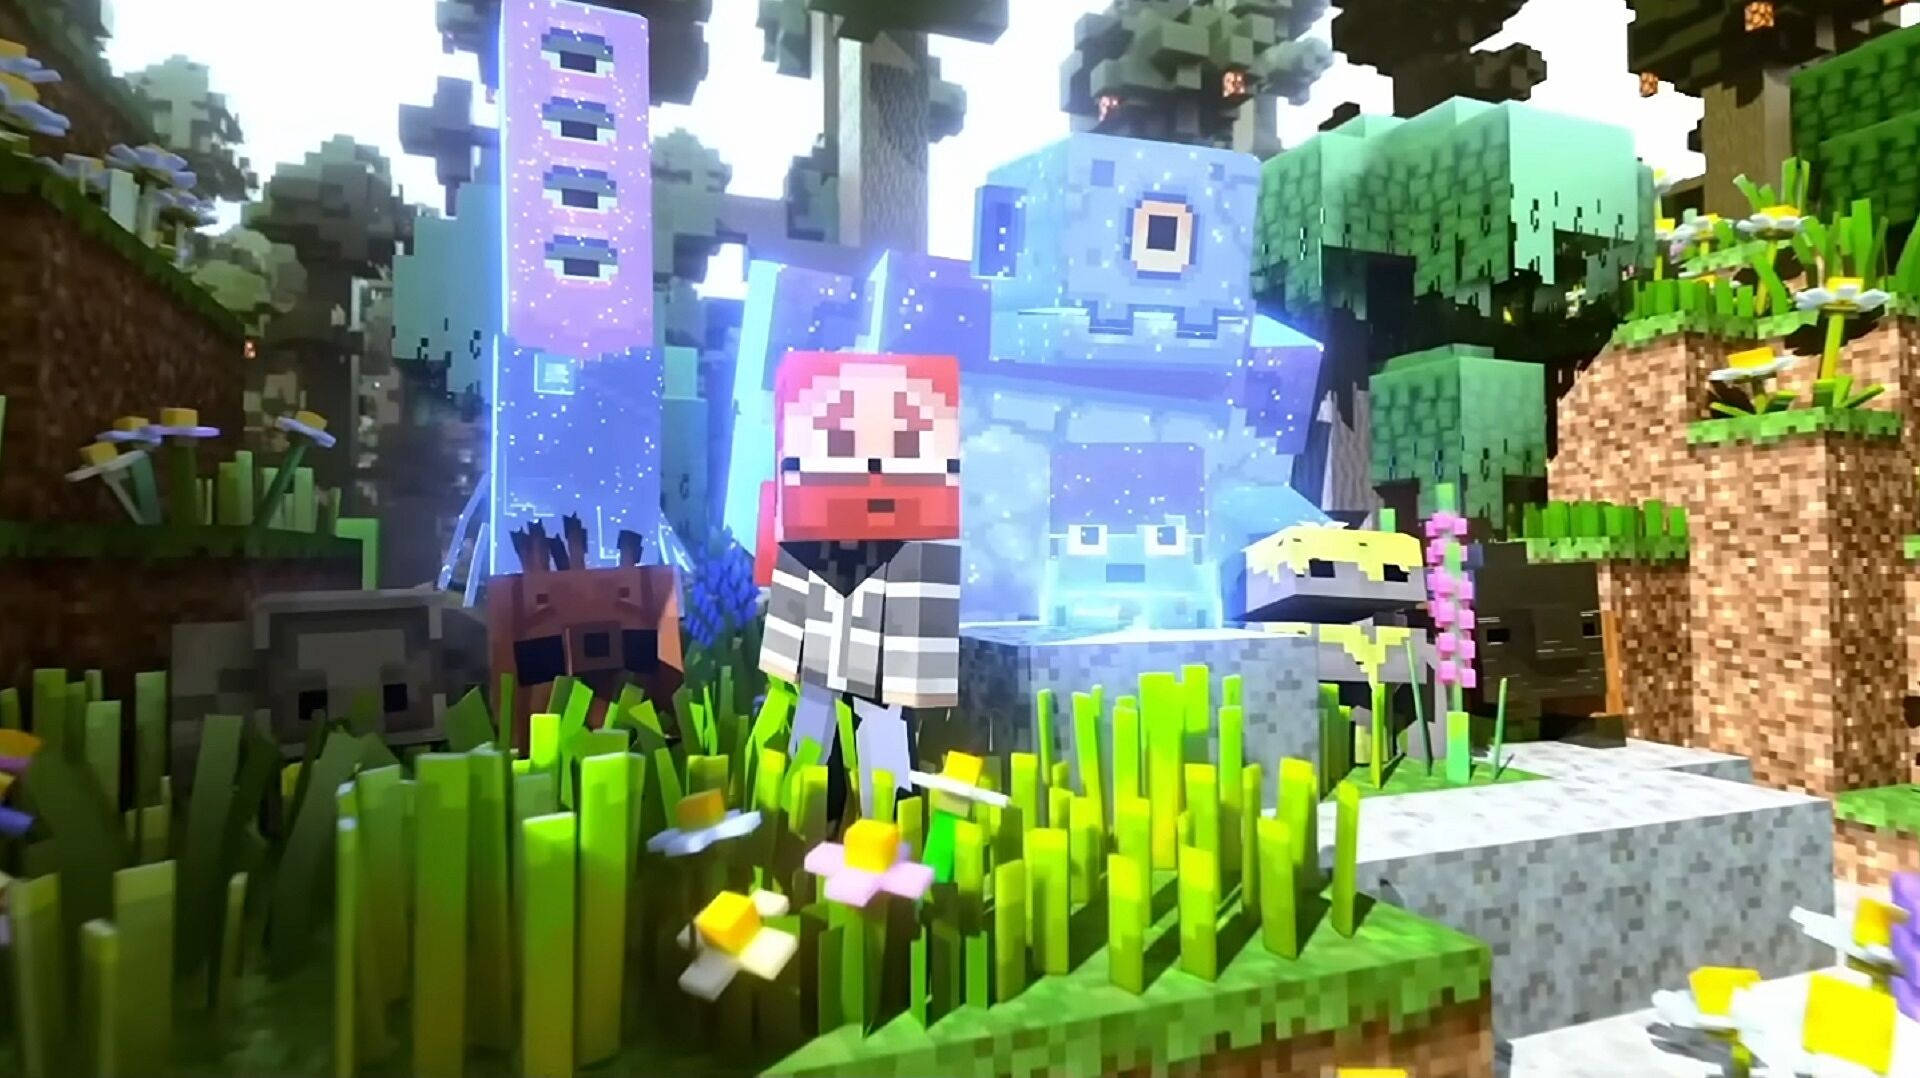 Paper craft minecraft [wallpaper] - Wallpapers and art - Mine